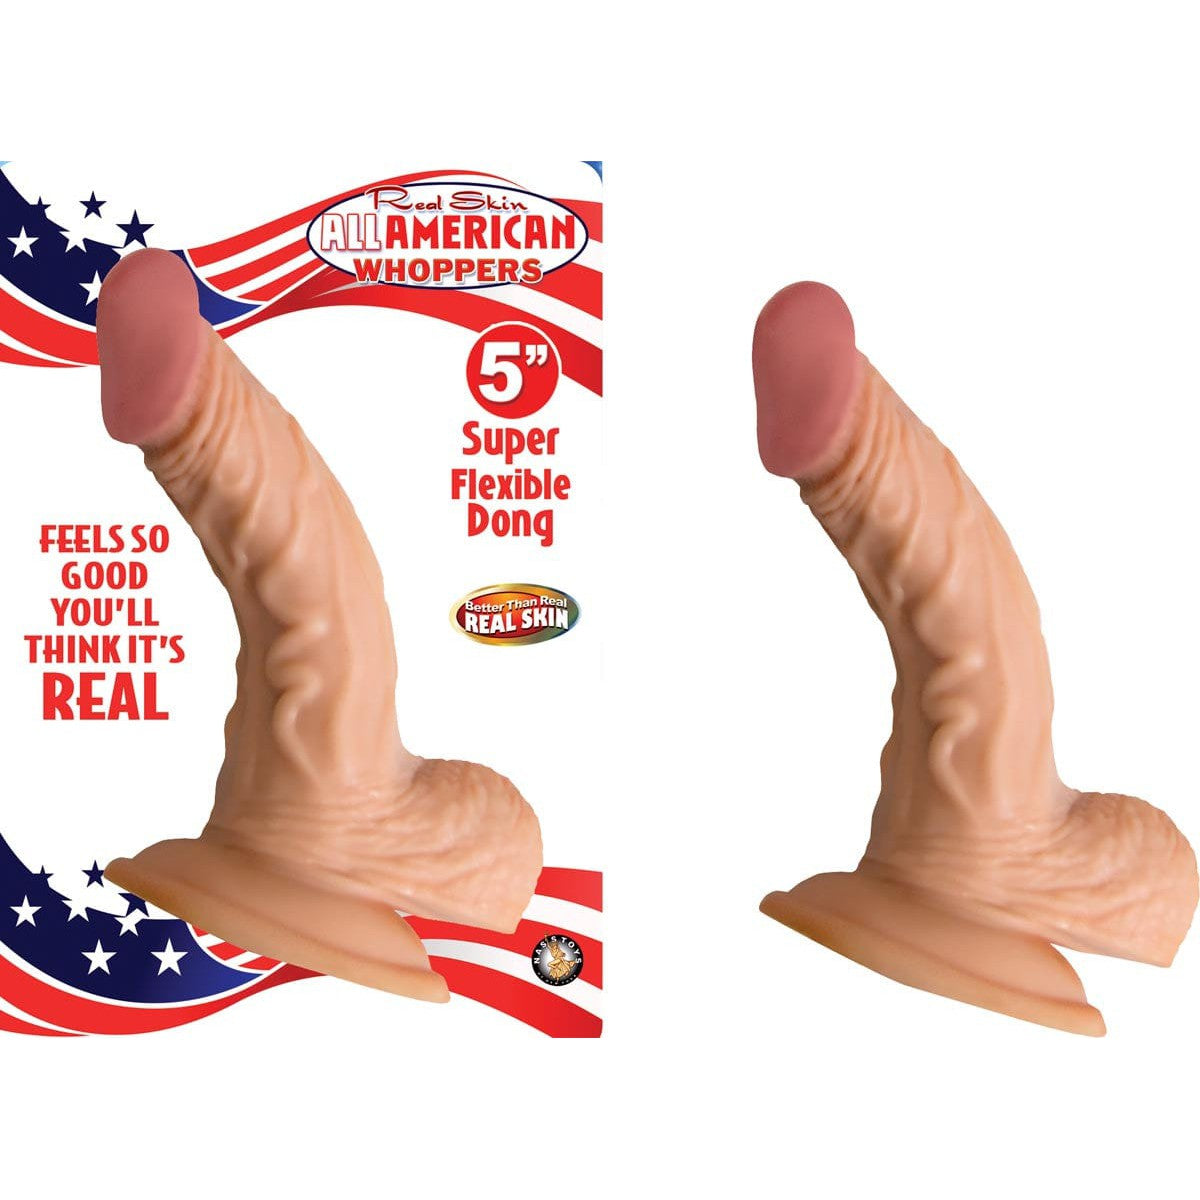 Nasstoys - Real Skin All American Whoppers Super Flexible Dong with Balls Realistic Dildo with suction cup (Non Vibration) 782631223019 CherryAffairs